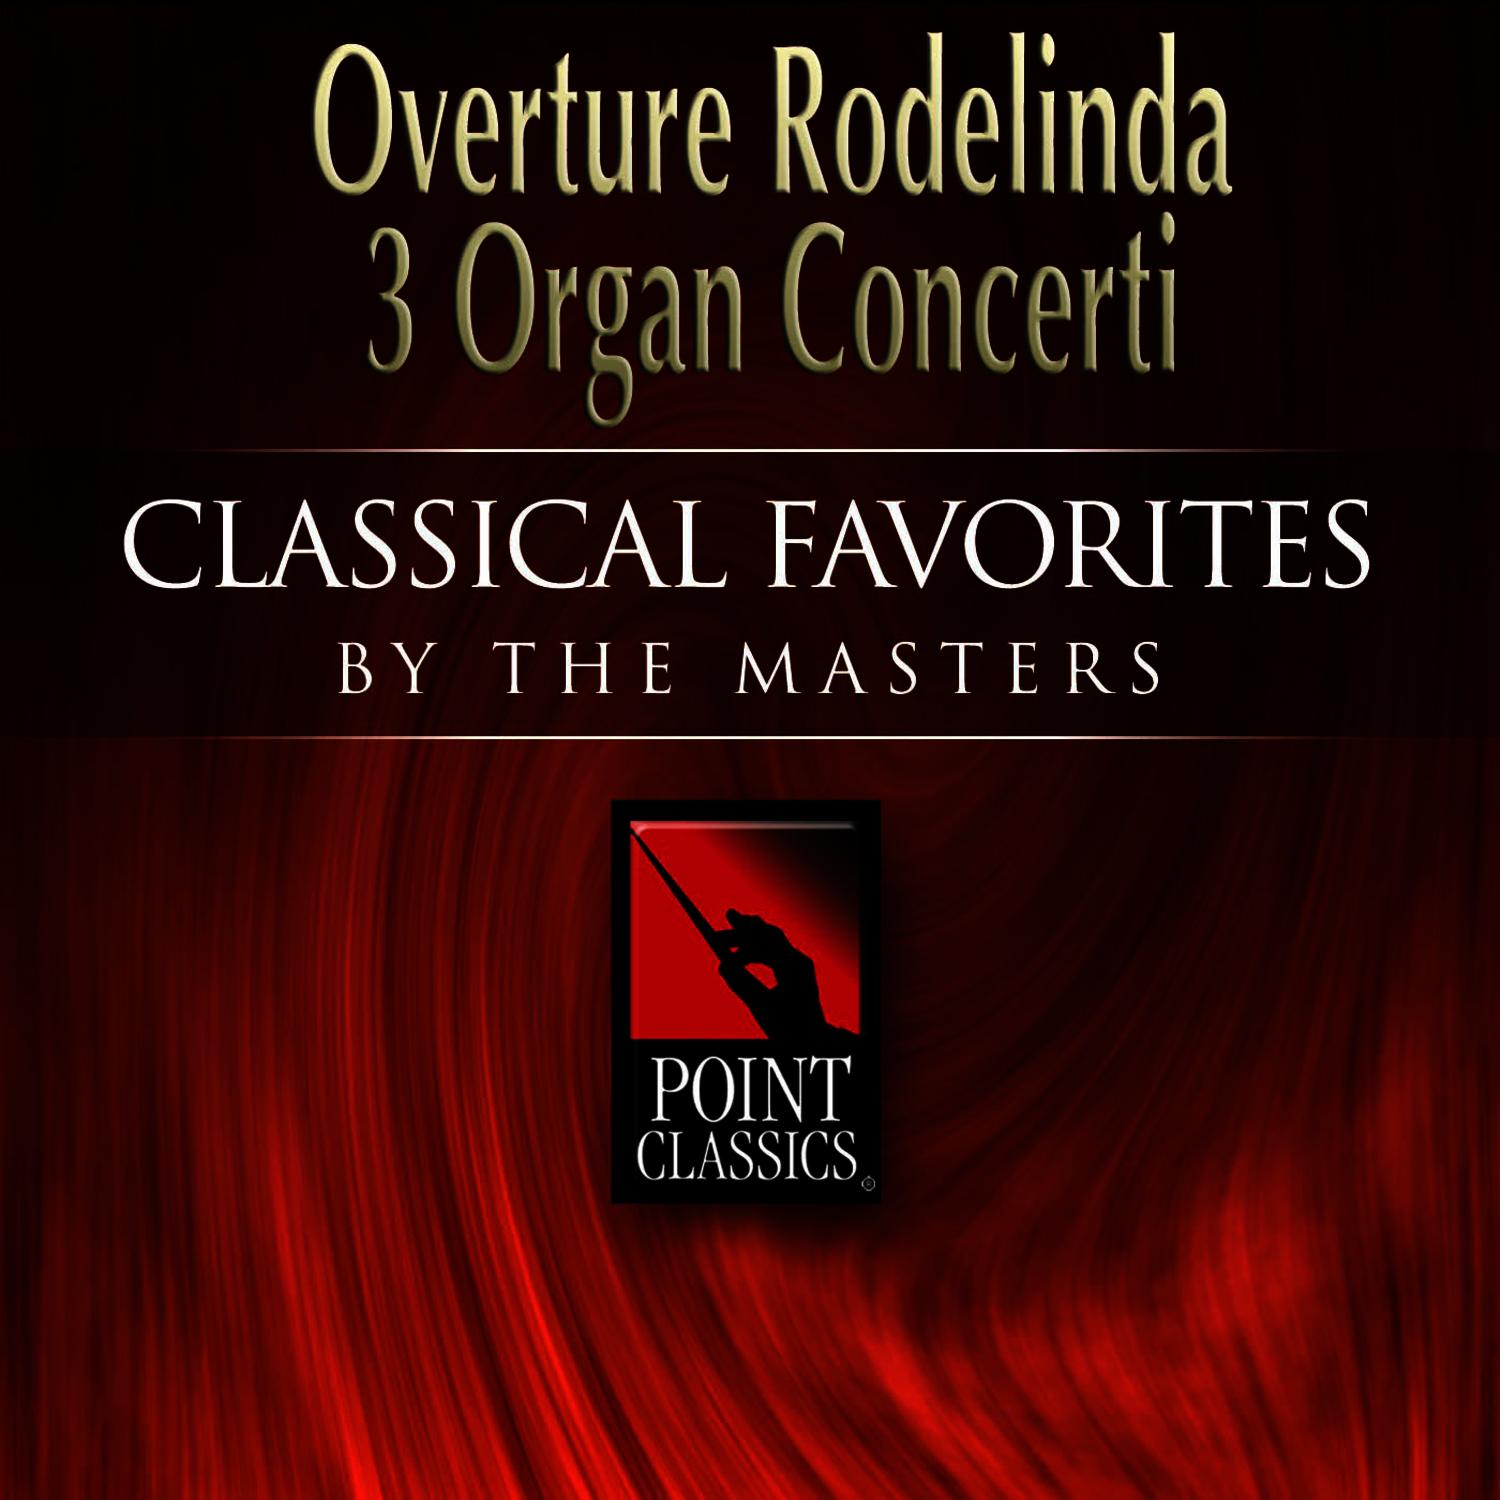 Concerto for Organ and Orchestra No. 1, in G minor, Op. 4: Allegro